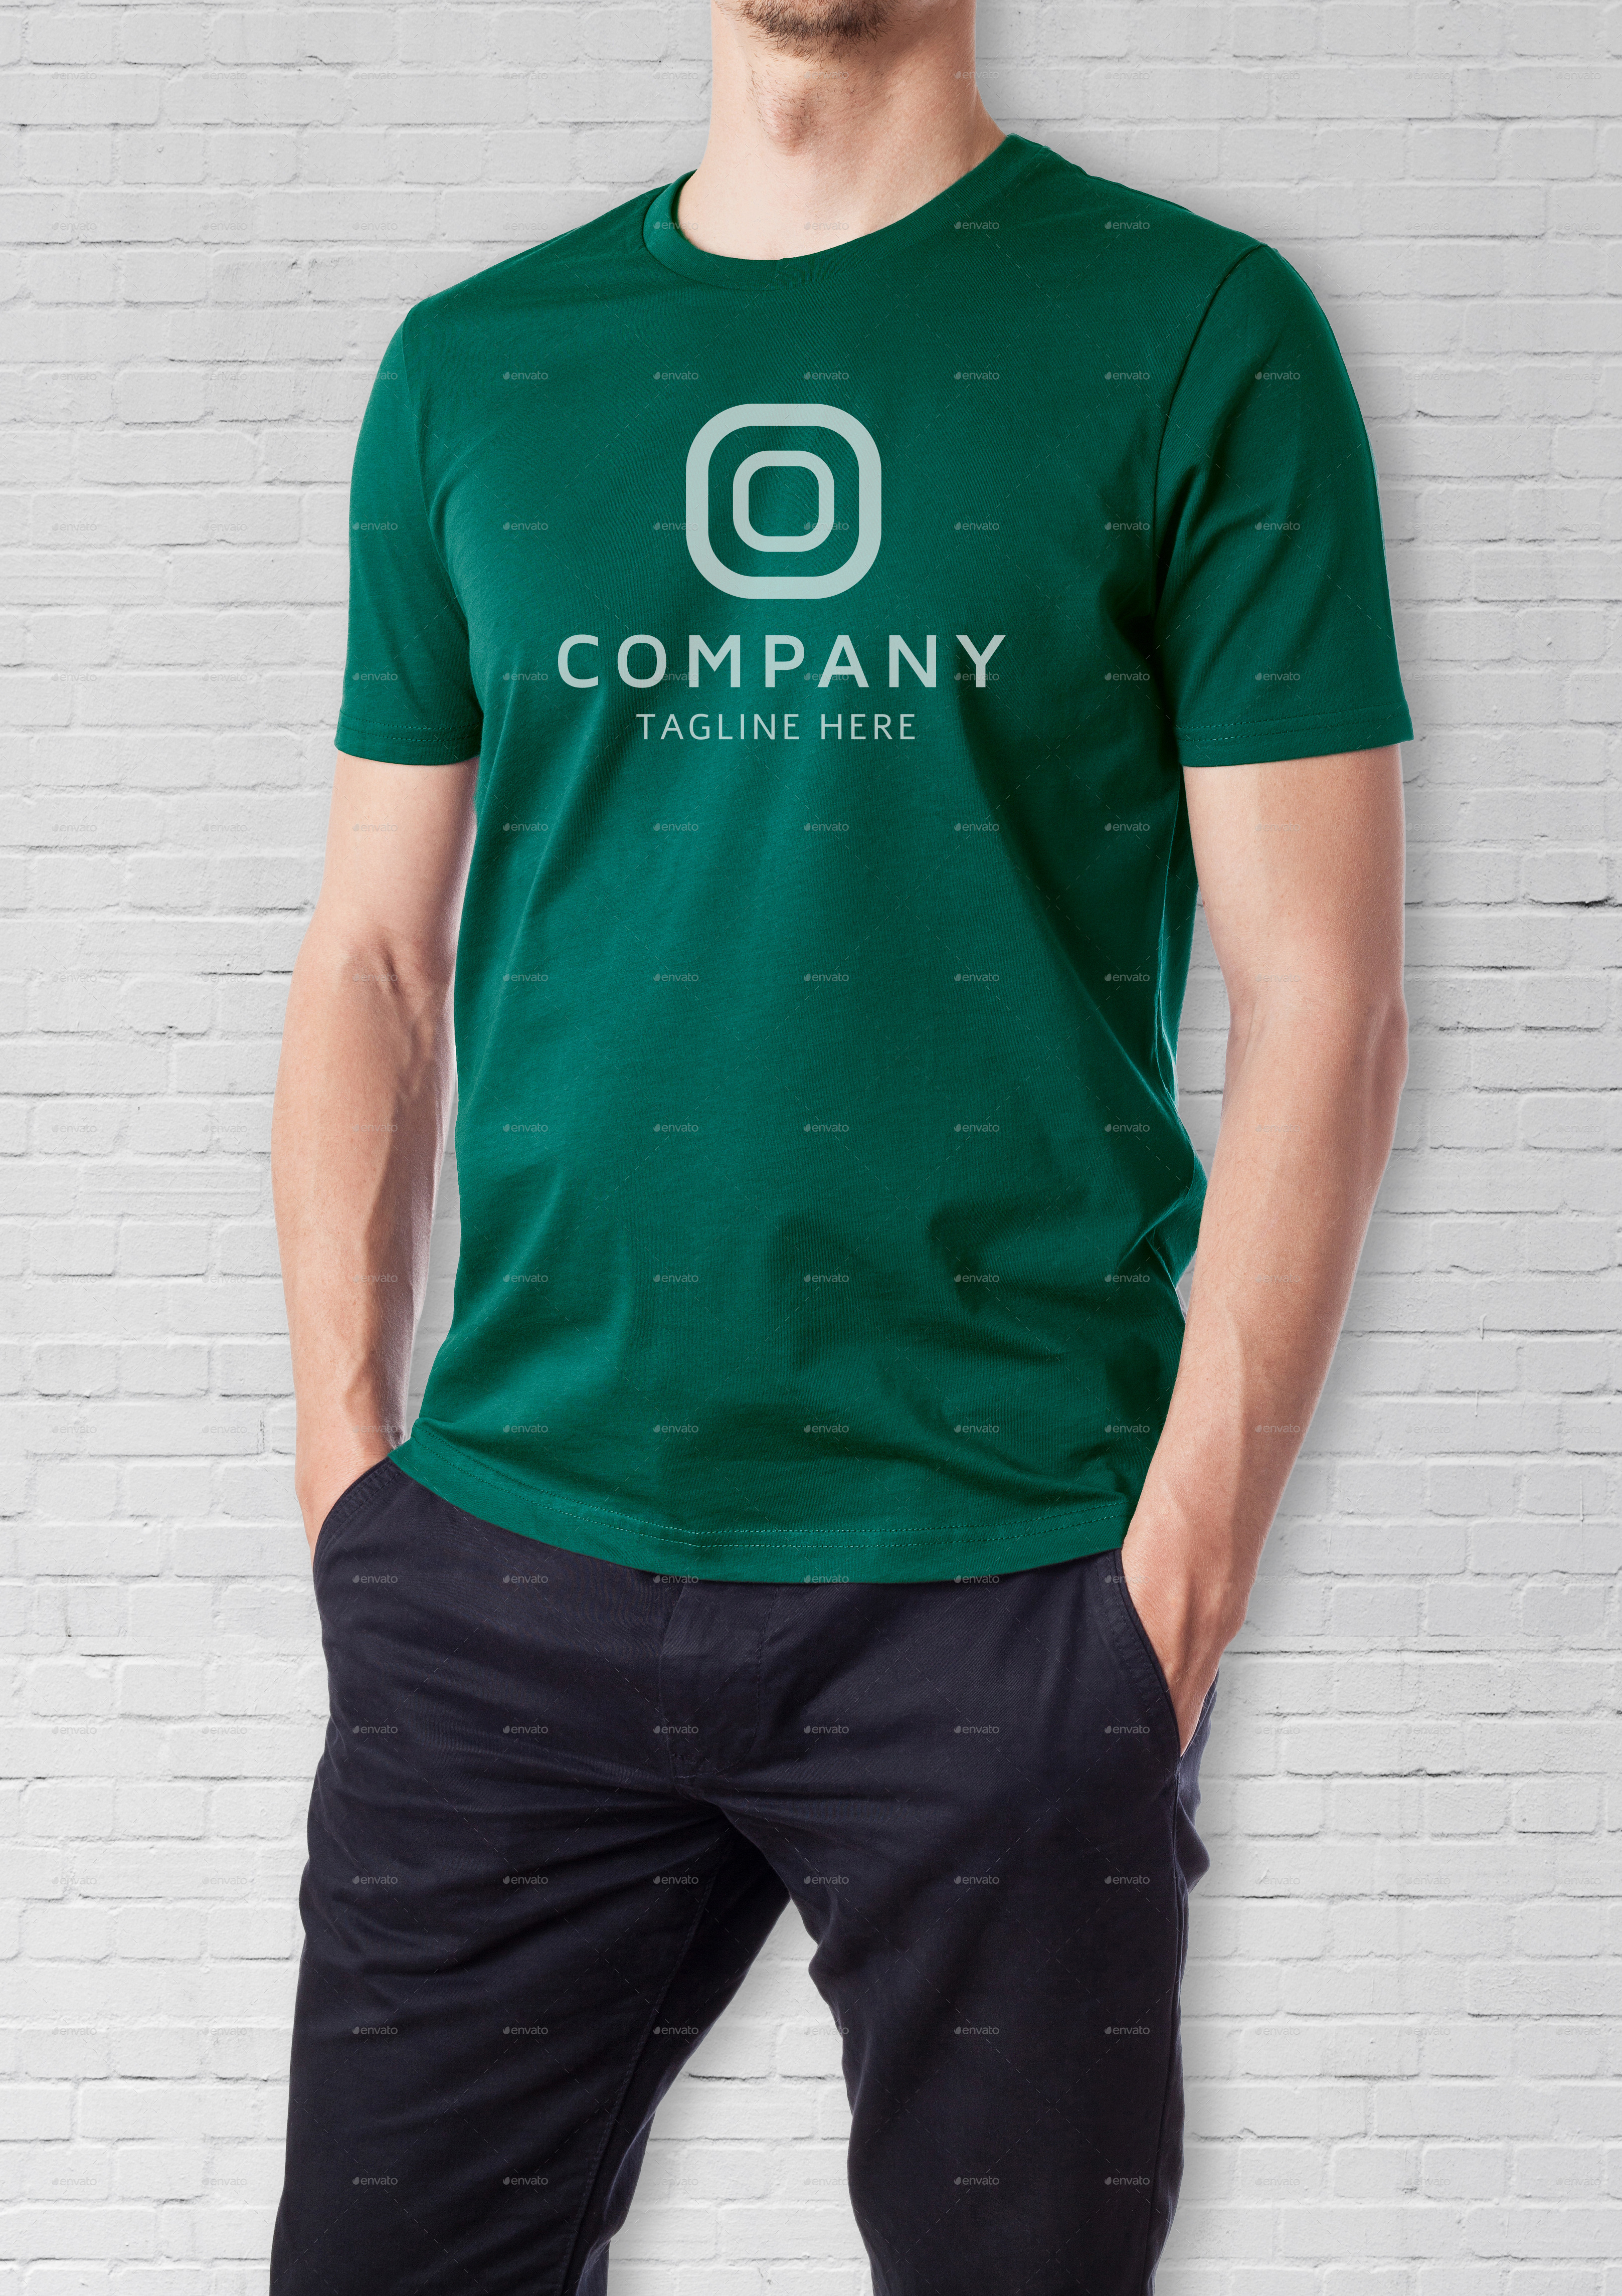 Download Men Multipurpose Tshirt Mock Up by cudographic | GraphicRiver